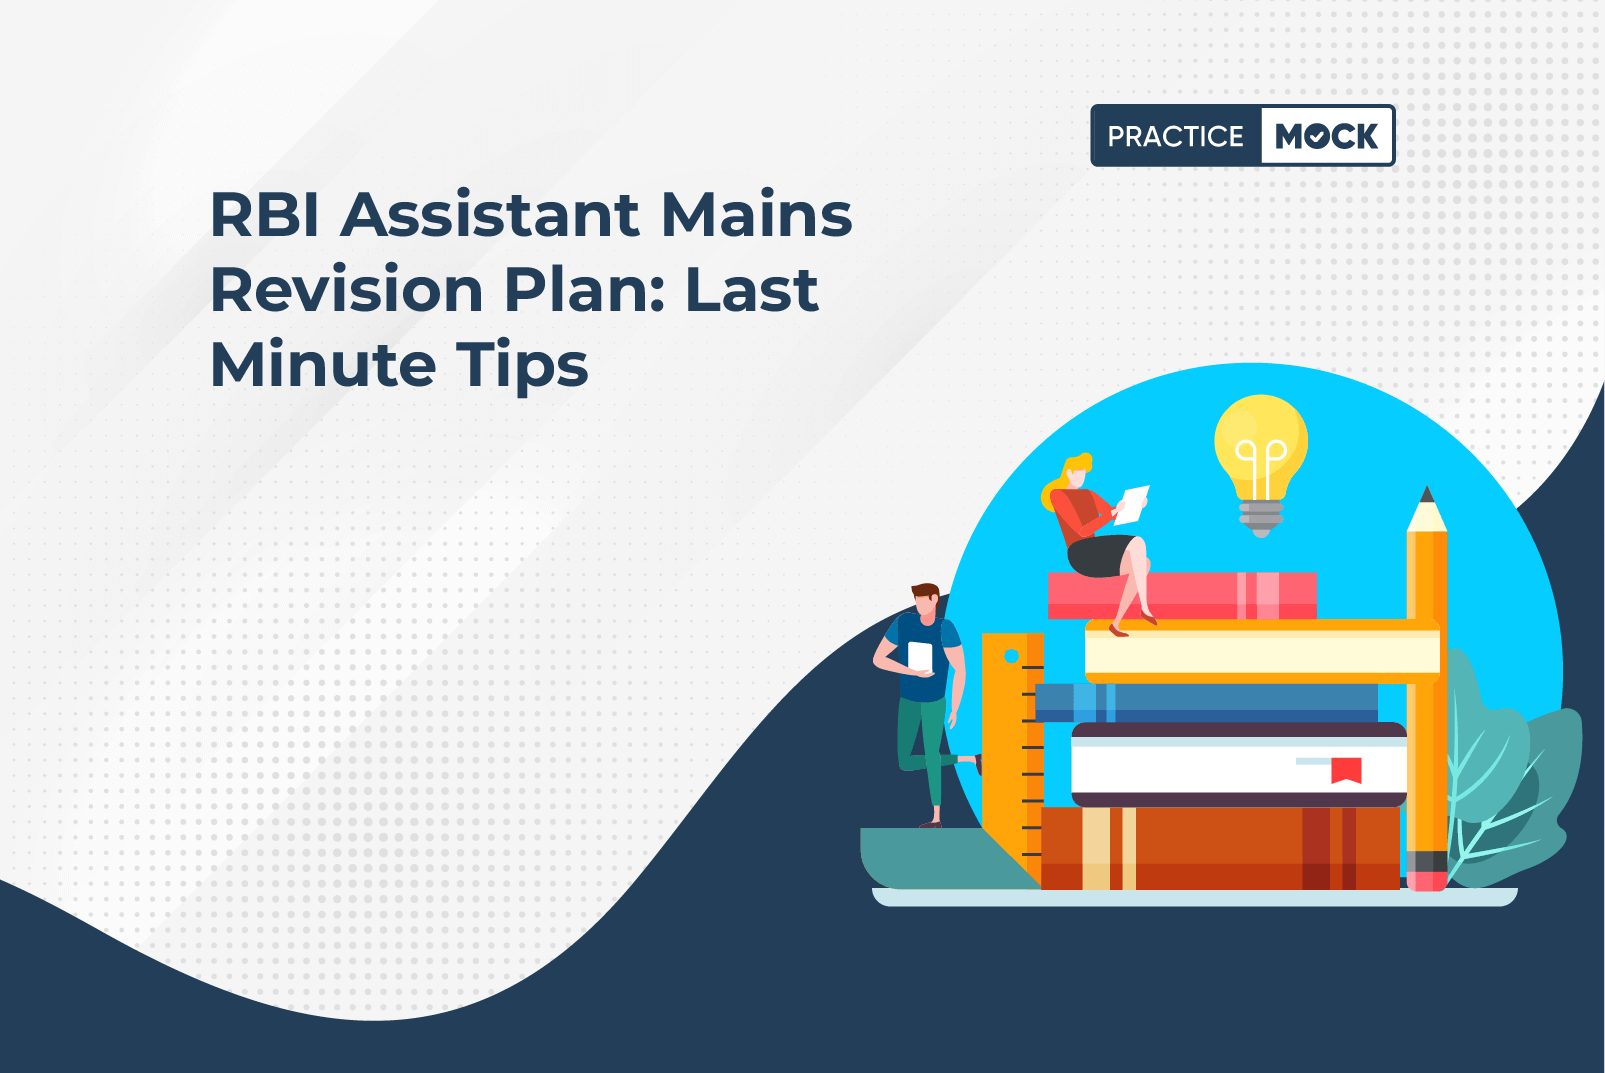 RBI Assistant Mains Revision Plan Last Minute Tips